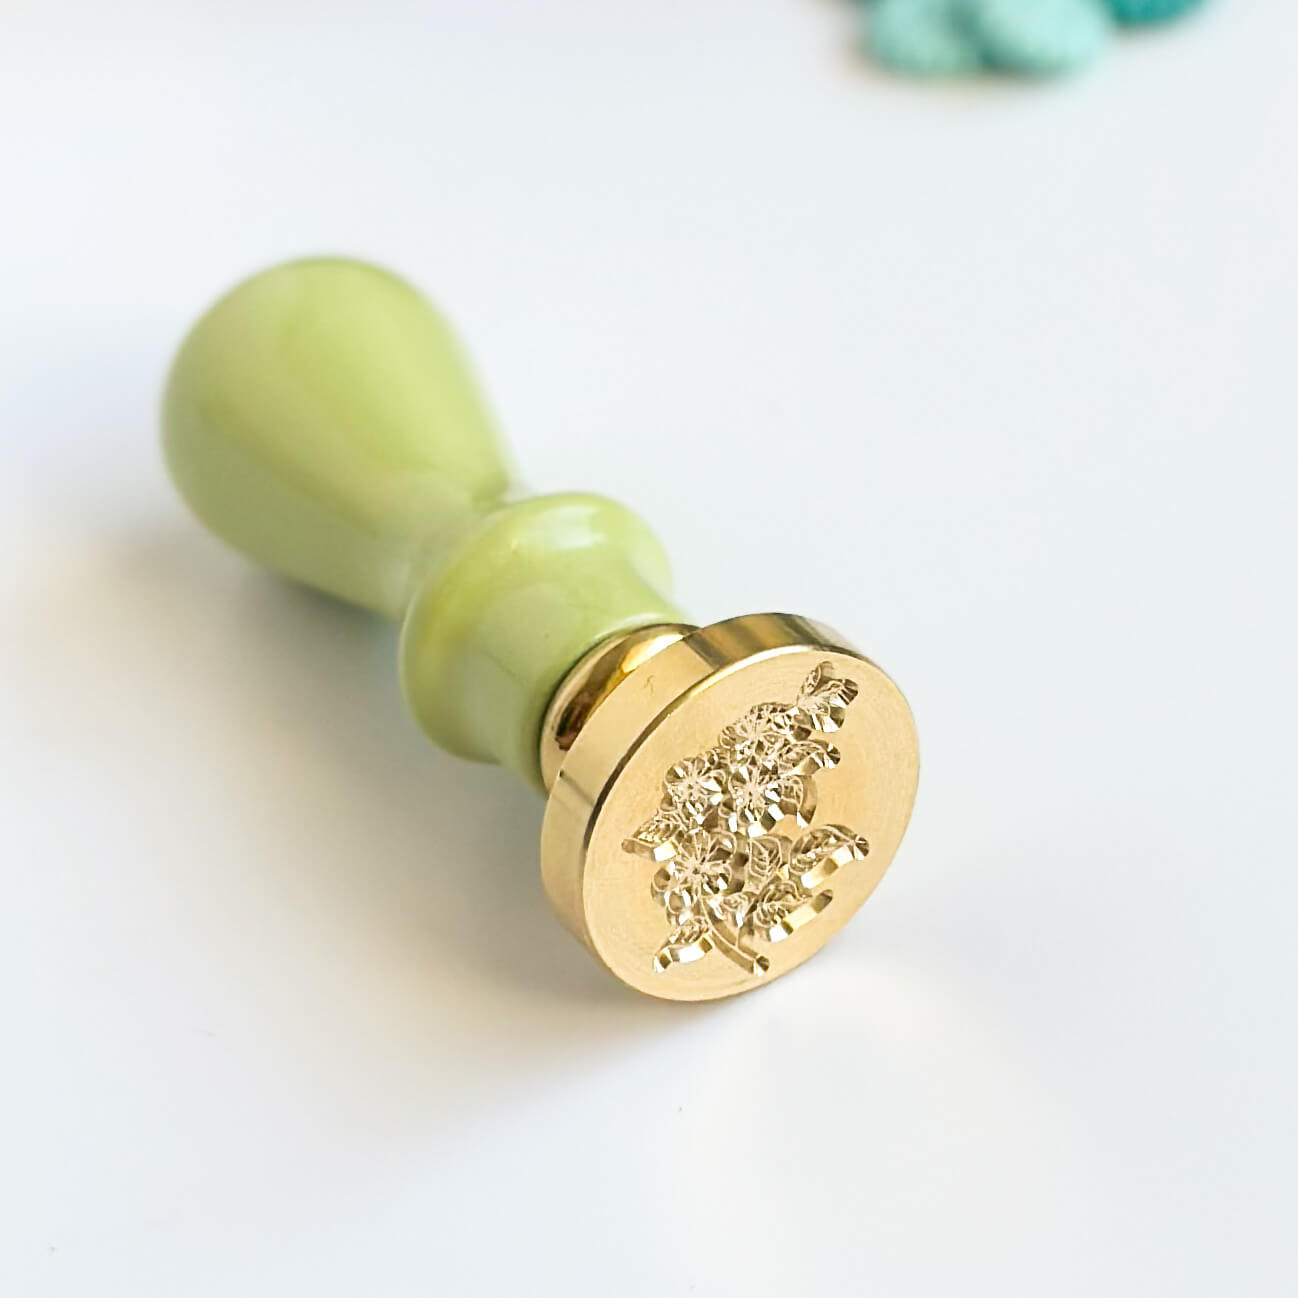 25mm Brass wax seal stamp with flower design has green, wooden handle. 